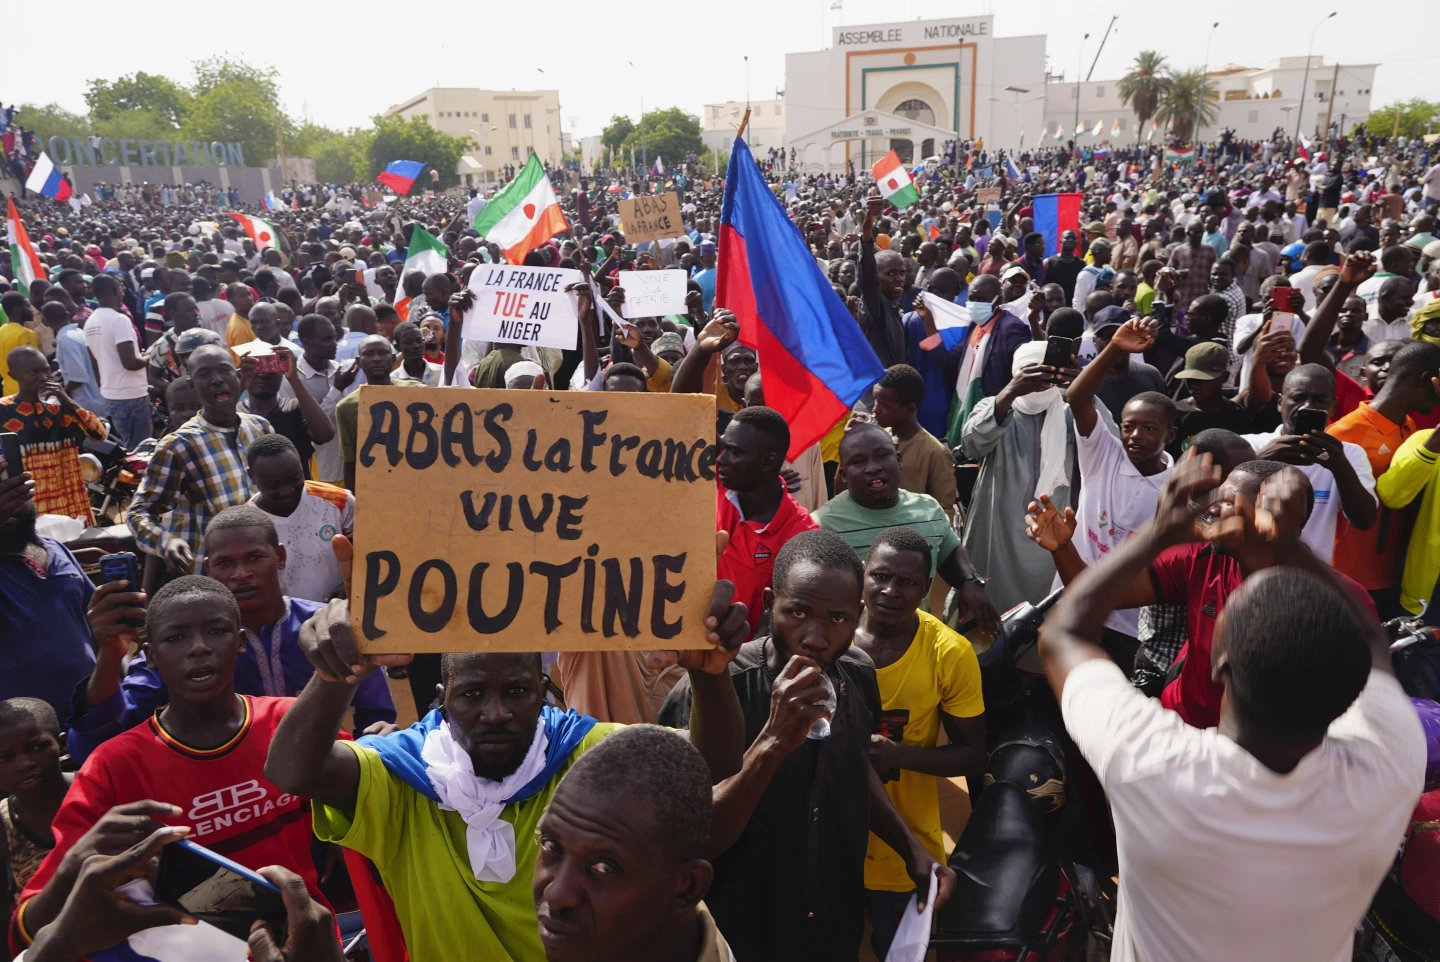 French Embassy in Niger Is Attacked as Protesters Waving Russian Flags March Through Capital